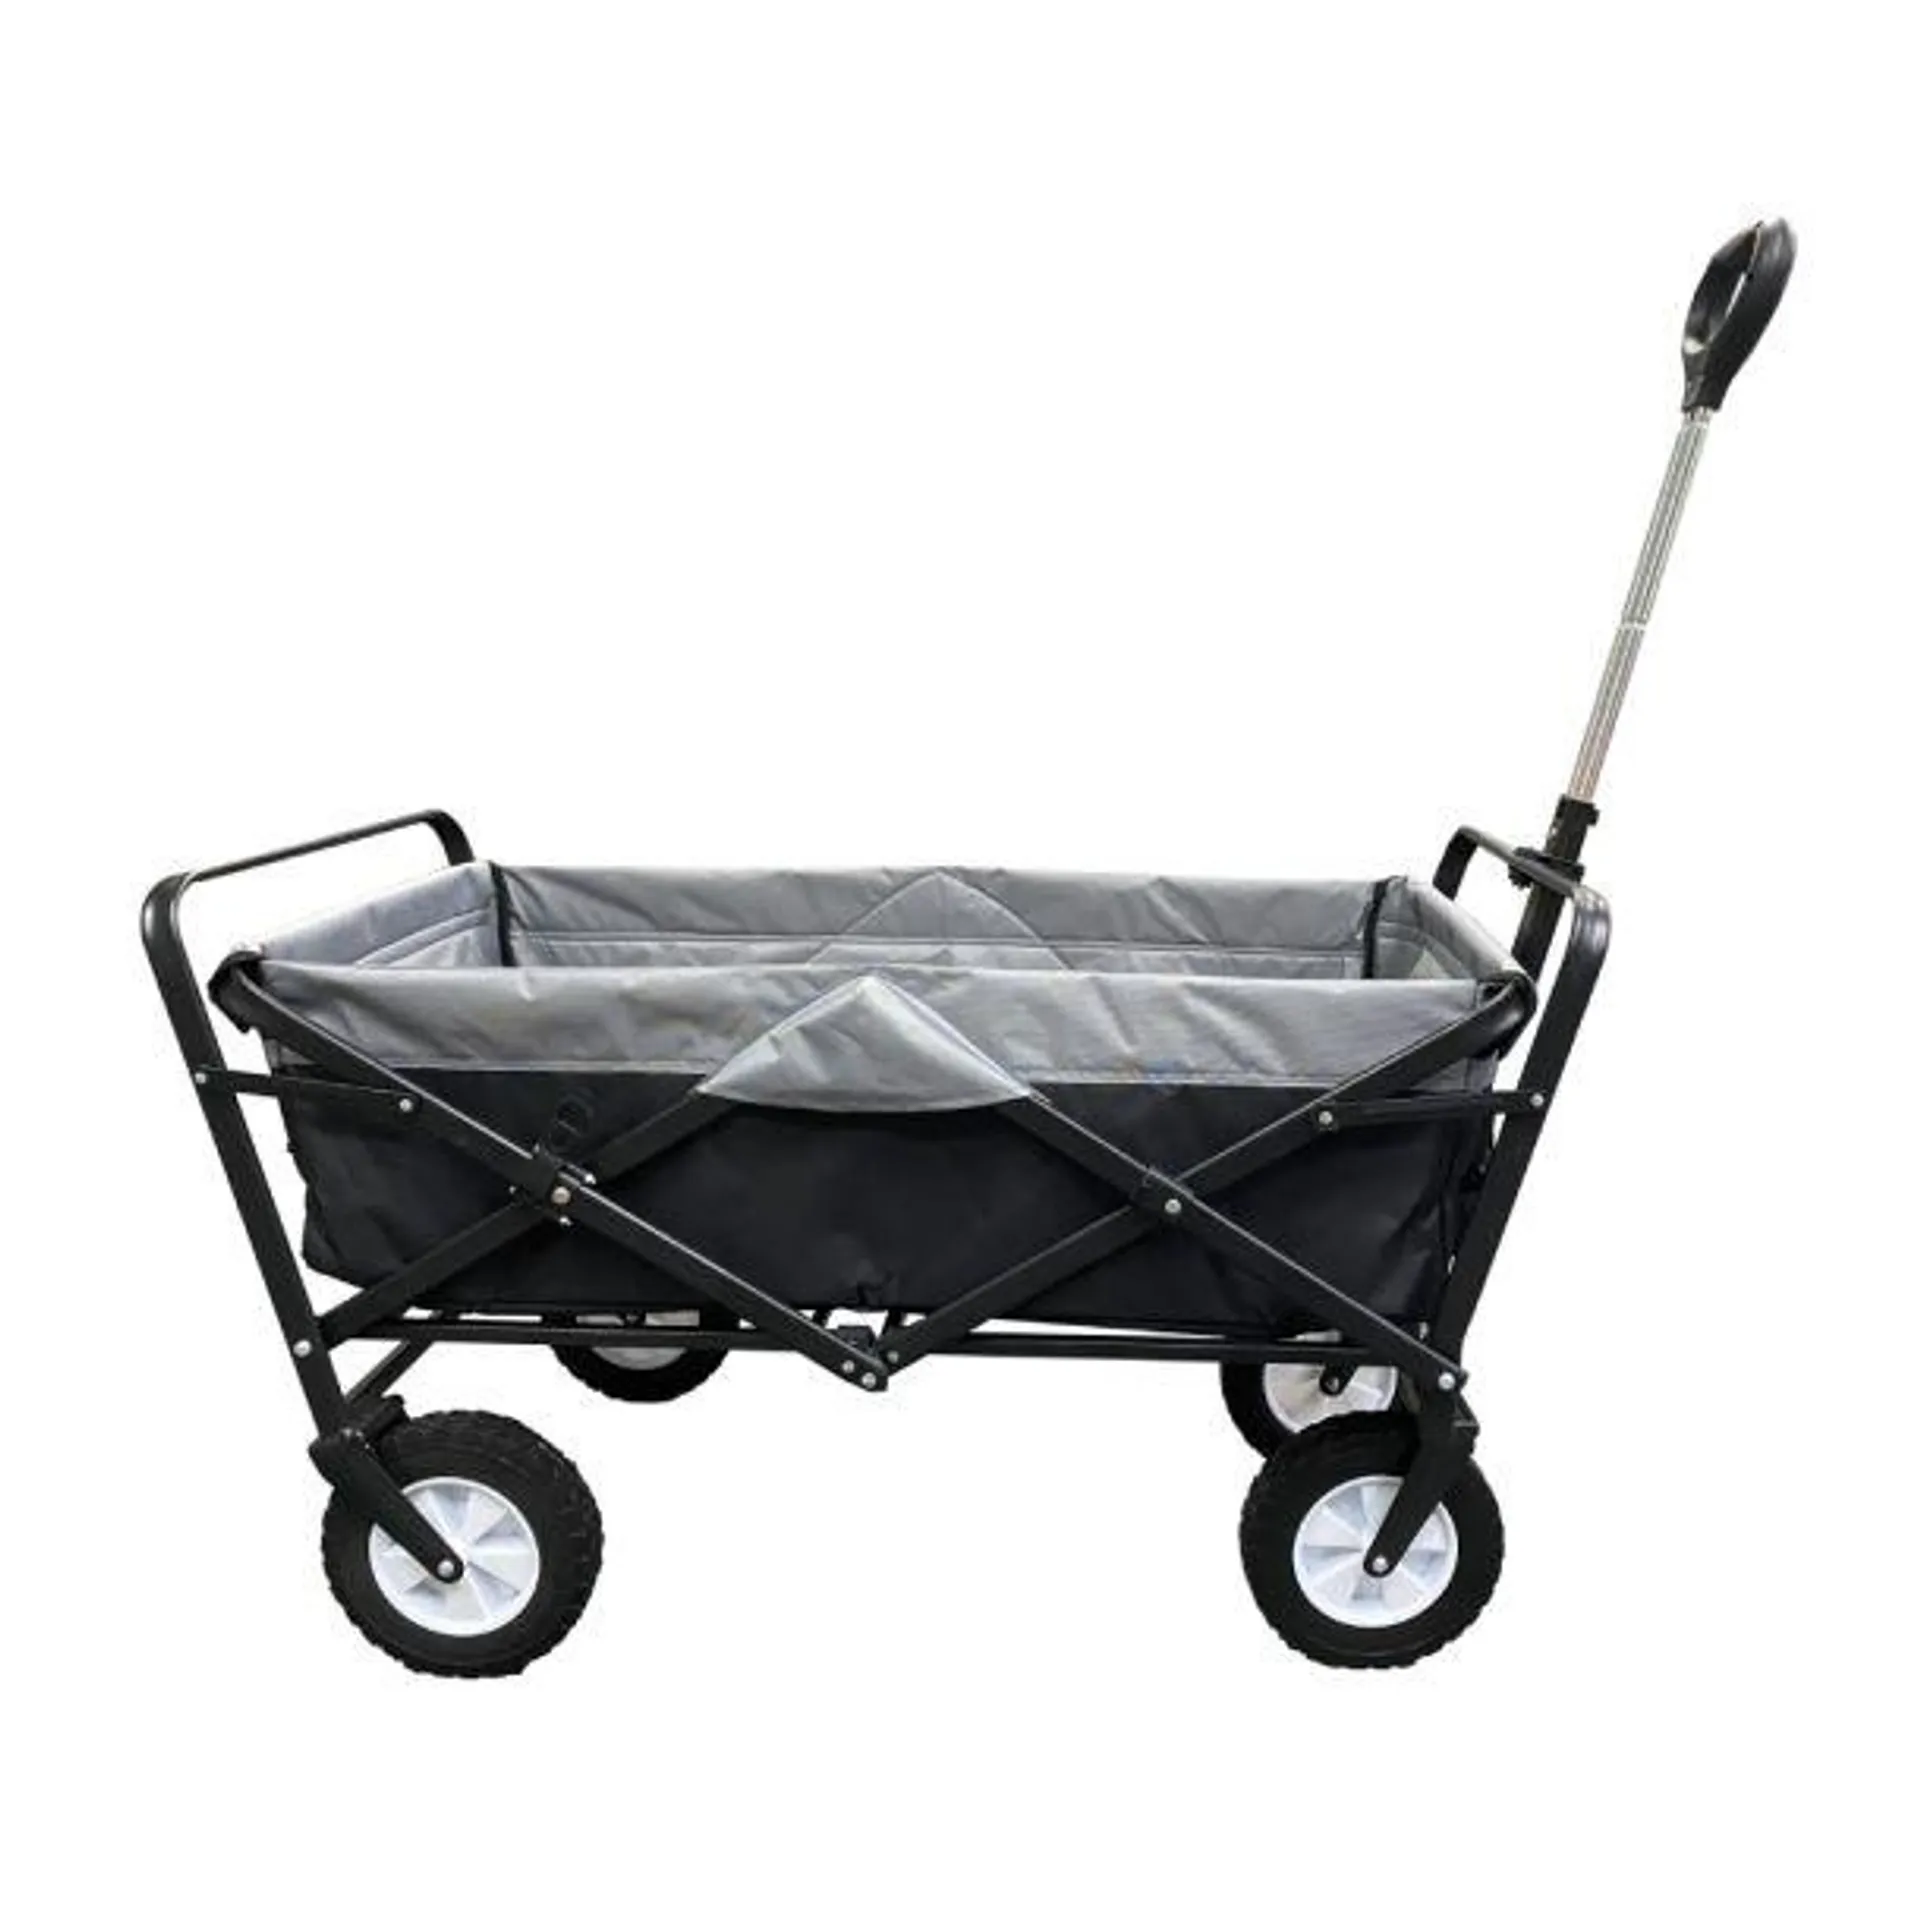 The Outdoor Institute Folding Wagon Cart - Black/Gray